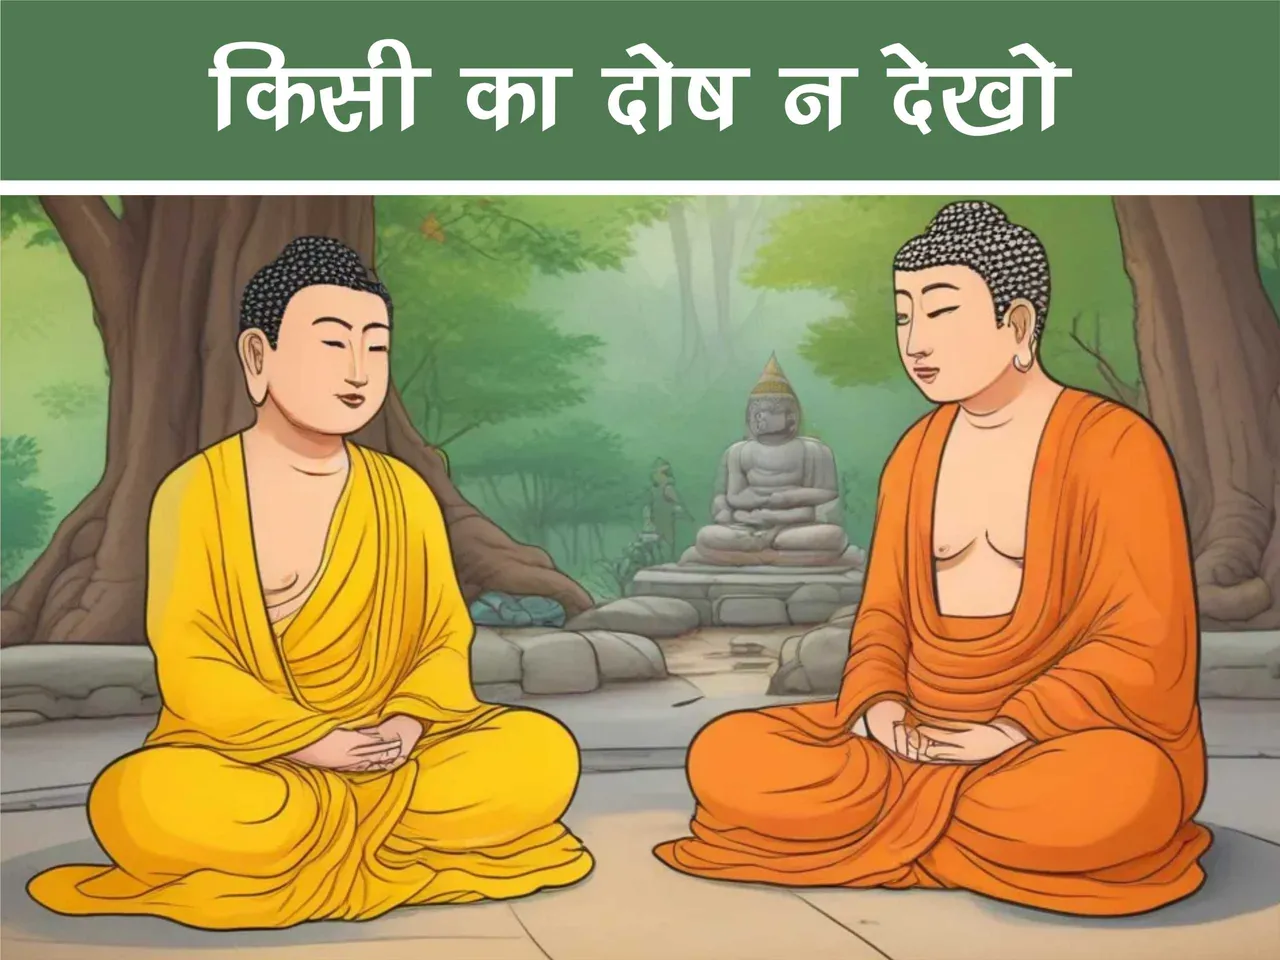 Lord Buddha with his disciple